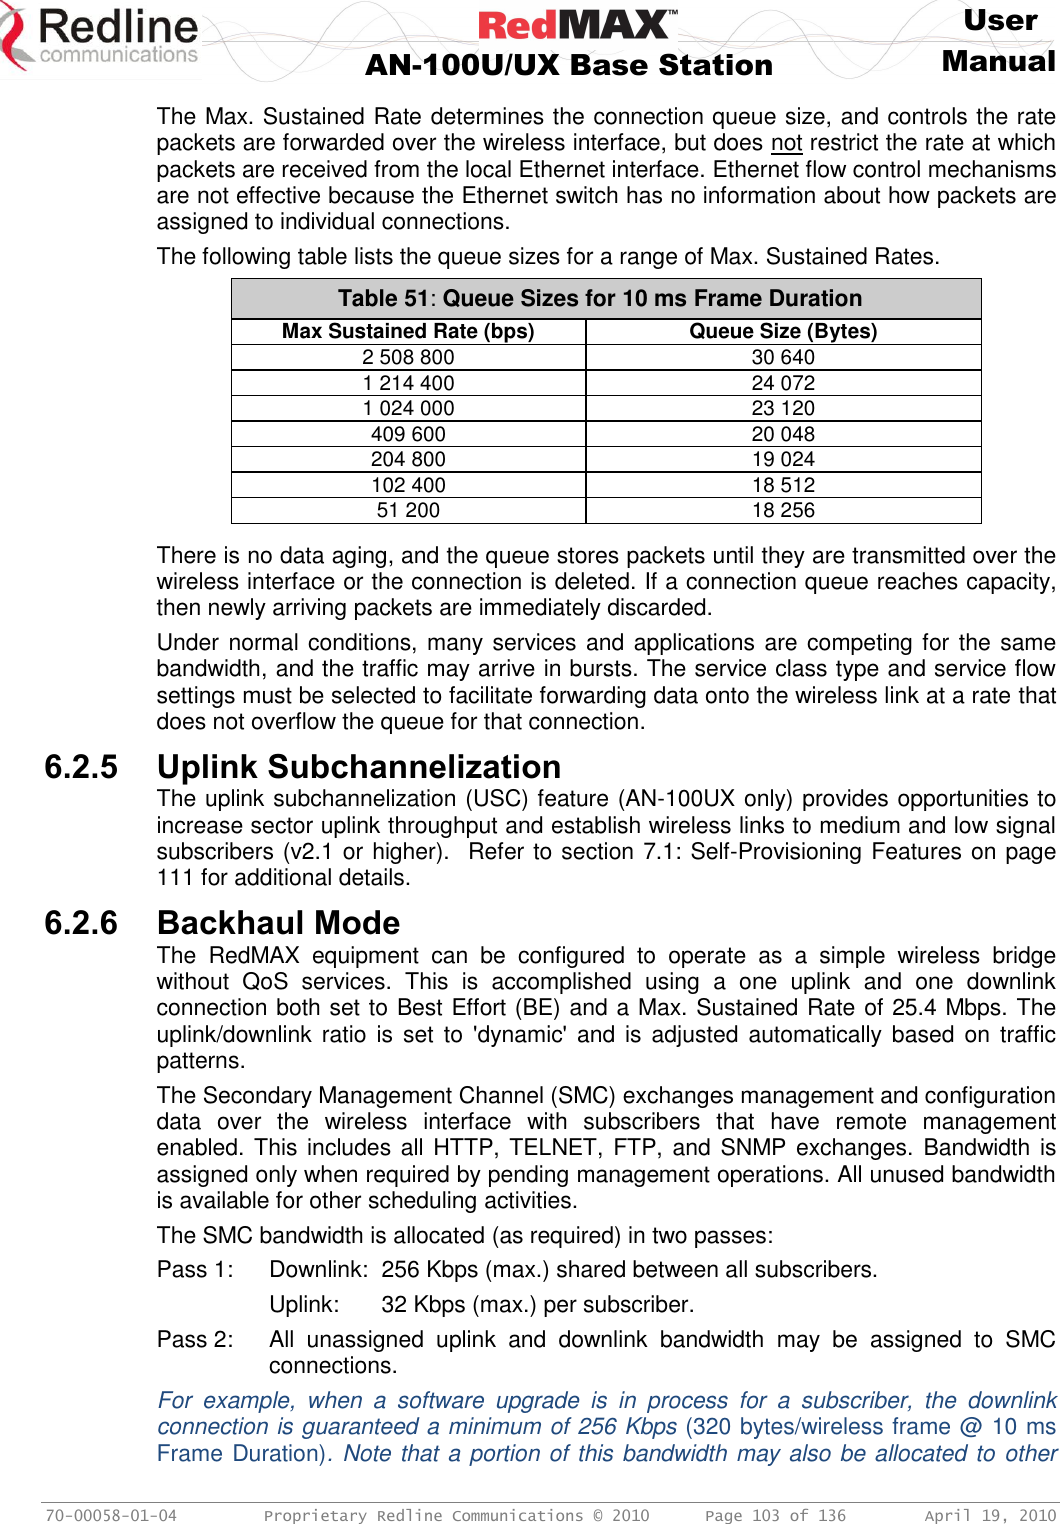     User  AN-100U/UX Base Station Manual   70-00058-01-04  Proprietary Redline Communications © 2010   Page 103 of 136  April 19, 2010 The Max. Sustained Rate determines the connection queue size, and controls the rate packets are forwarded over the wireless interface, but does not restrict the rate at which packets are received from the local Ethernet interface. Ethernet flow control mechanisms are not effective because the Ethernet switch has no information about how packets are assigned to individual connections. The following table lists the queue sizes for a range of Max. Sustained Rates. Table 51: Queue Sizes for 10 ms Frame Duration Max Sustained Rate (bps) Queue Size (Bytes) 2 508 800 30 640 1 214 400 24 072 1 024 000 23 120 409 600 20 048 204 800 19 024 102 400 18 512 51 200 18 256  There is no data aging, and the queue stores packets until they are transmitted over the wireless interface or the connection is deleted. If a connection queue reaches capacity, then newly arriving packets are immediately discarded.  Under normal conditions, many services and applications are competing for the same bandwidth, and the traffic may arrive in bursts. The service class type and service flow settings must be selected to facilitate forwarding data onto the wireless link at a rate that does not overflow the queue for that connection. 6.2.5 Uplink Subchannelization The uplink subchannelization (USC) feature (AN-100UX only) provides opportunities to increase sector uplink throughput and establish wireless links to medium and low signal subscribers (v2.1 or higher).  Refer to section 7.1: Self-Provisioning Features on page 111 for additional details. 6.2.6 Backhaul Mode The  RedMAX  equipment  can  be  configured  to  operate  as  a  simple  wireless  bridge without  QoS  services.  This  is  accomplished  using  a  one  uplink  and  one  downlink connection both set to Best Effort (BE) and a Max. Sustained Rate of 25.4 Mbps. The uplink/downlink  ratio  is  set  to  &apos;dynamic&apos; and  is adjusted  automatically  based  on  traffic patterns.  The Secondary Management Channel (SMC) exchanges management and configuration data  over  the  wireless  interface  with  subscribers  that  have  remote  management enabled. This includes all HTTP, TELNET, FTP, and SNMP exchanges. Bandwidth is assigned only when required by pending management operations. All unused bandwidth is available for other scheduling activities. The SMC bandwidth is allocated (as required) in two passes: Pass 1:  Downlink:  256 Kbps (max.) shared between all subscribers.   Uplink:   32 Kbps (max.) per subscriber. Pass 2:  All  unassigned  uplink  and  downlink  bandwidth  may  be  assigned  to  SMC connections. For  example,  when  a  software  upgrade  is  in  process  for  a  subscriber,  the  downlink connection is guaranteed a minimum of 256 Kbps (320 bytes/wireless frame @ 10 ms Frame Duration). Note that a portion of this bandwidth may also be allocated to other 